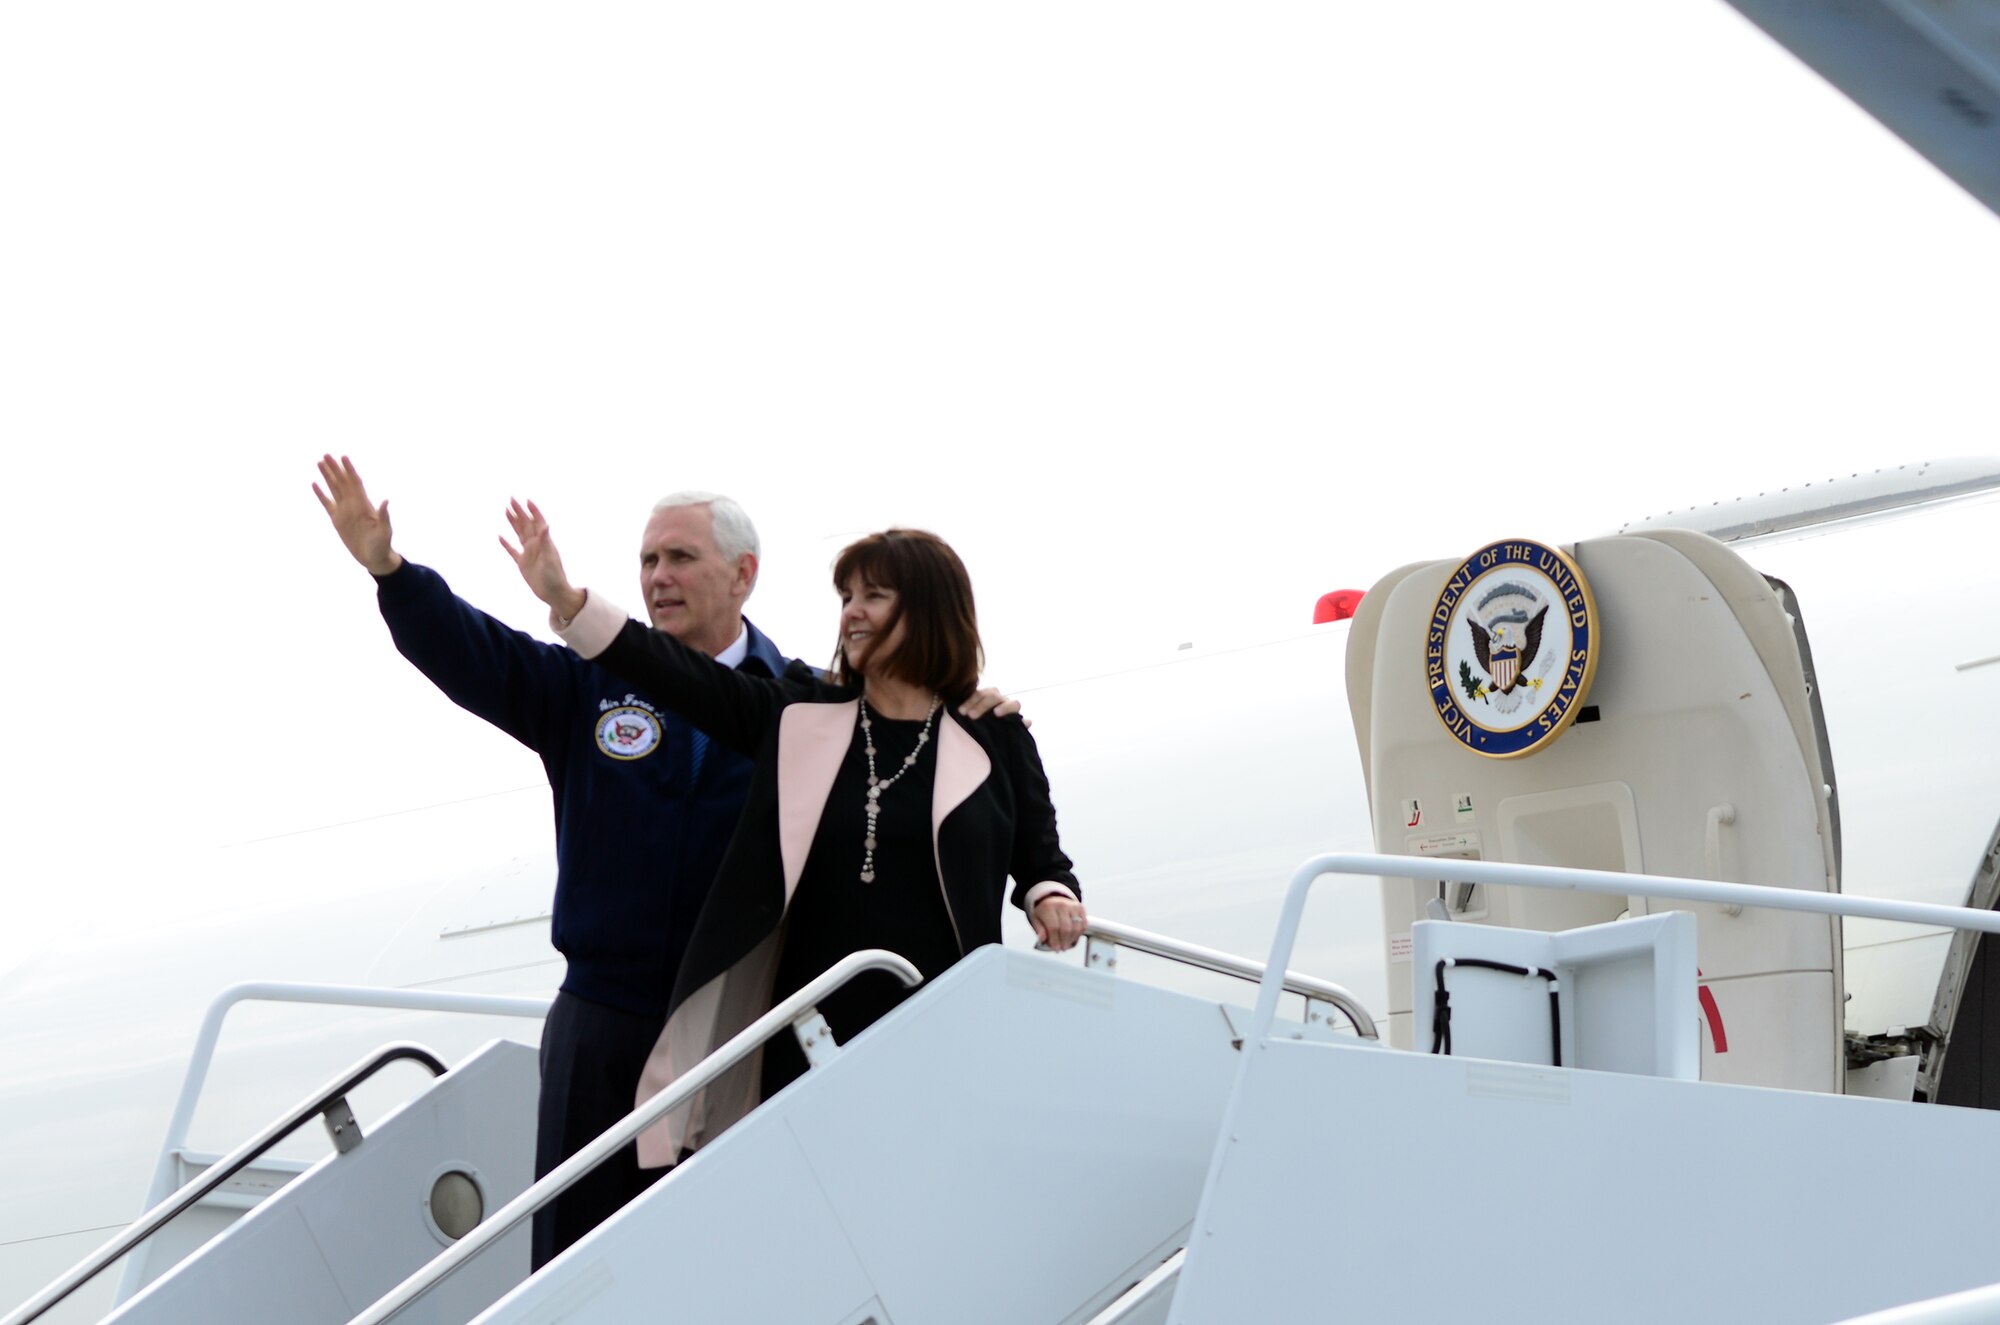 Vice President Mike Pence and his wife, Karen, wave goodbye as they prepare to depart Wright-Patterson Air Force Base, Ohio May 20, 2017 after speaking to more than 250 Wright Patt Airmen and their families for Armed Forces Day. The event was held inside a 445th Airlift Wing hangar. (U.S. Air Force photo/Tech. Sgt. Anthony Springer)